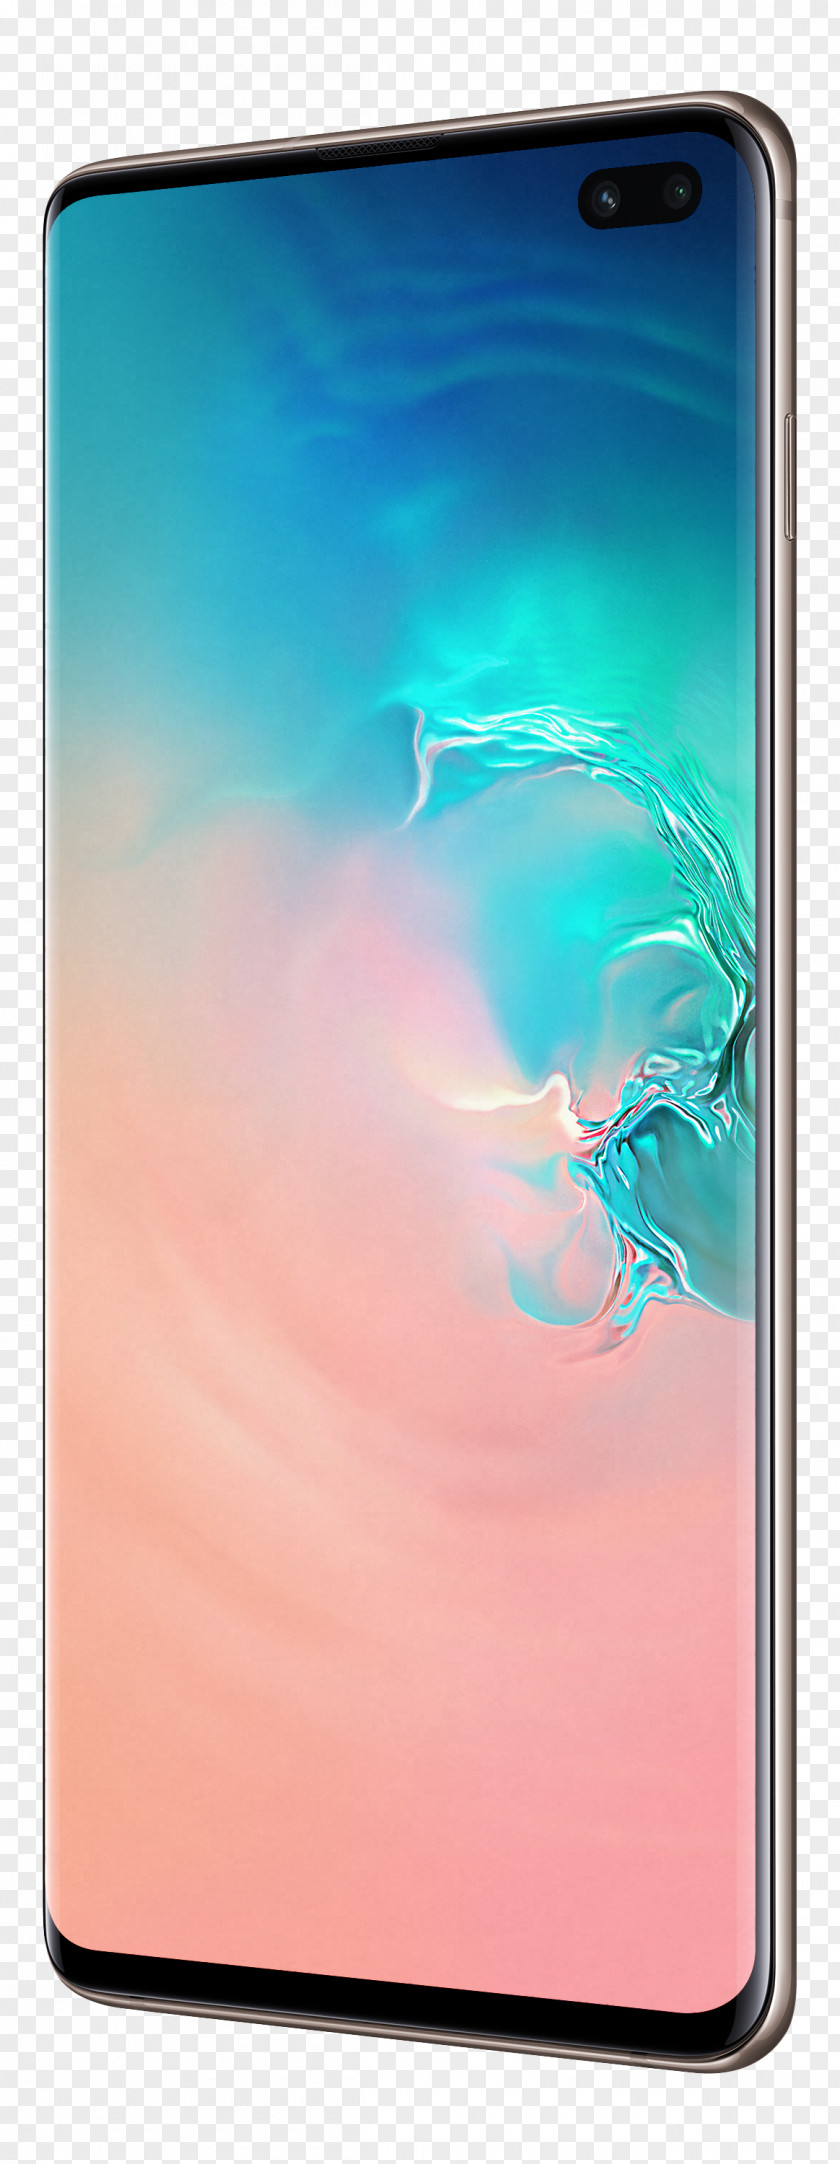 Sky Turquoise Samsung Galaxy Note 8 S10+ S9 PNG